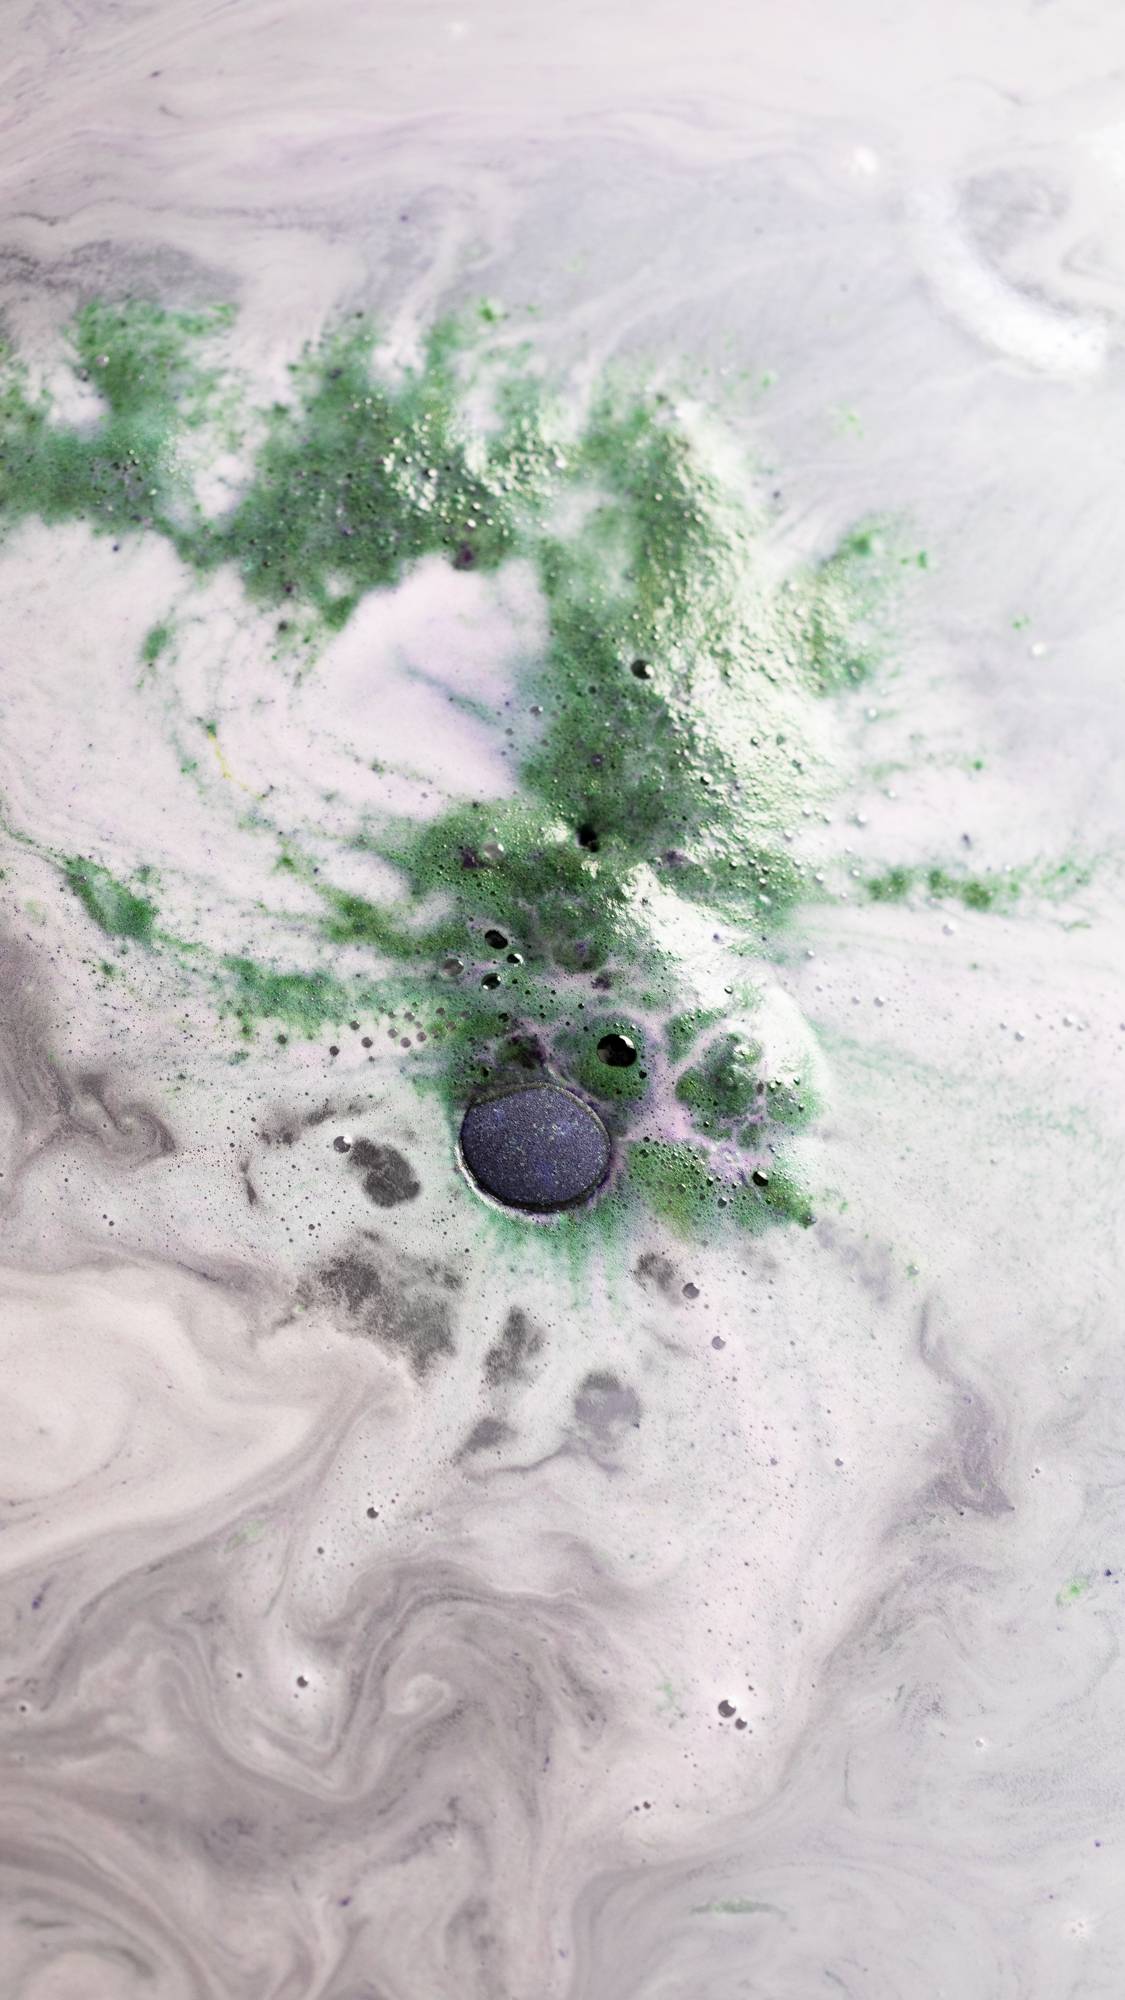 The image shows The Cloud bath bomb almost fully submerged surrounded by velvet foam with bursts of deep green.